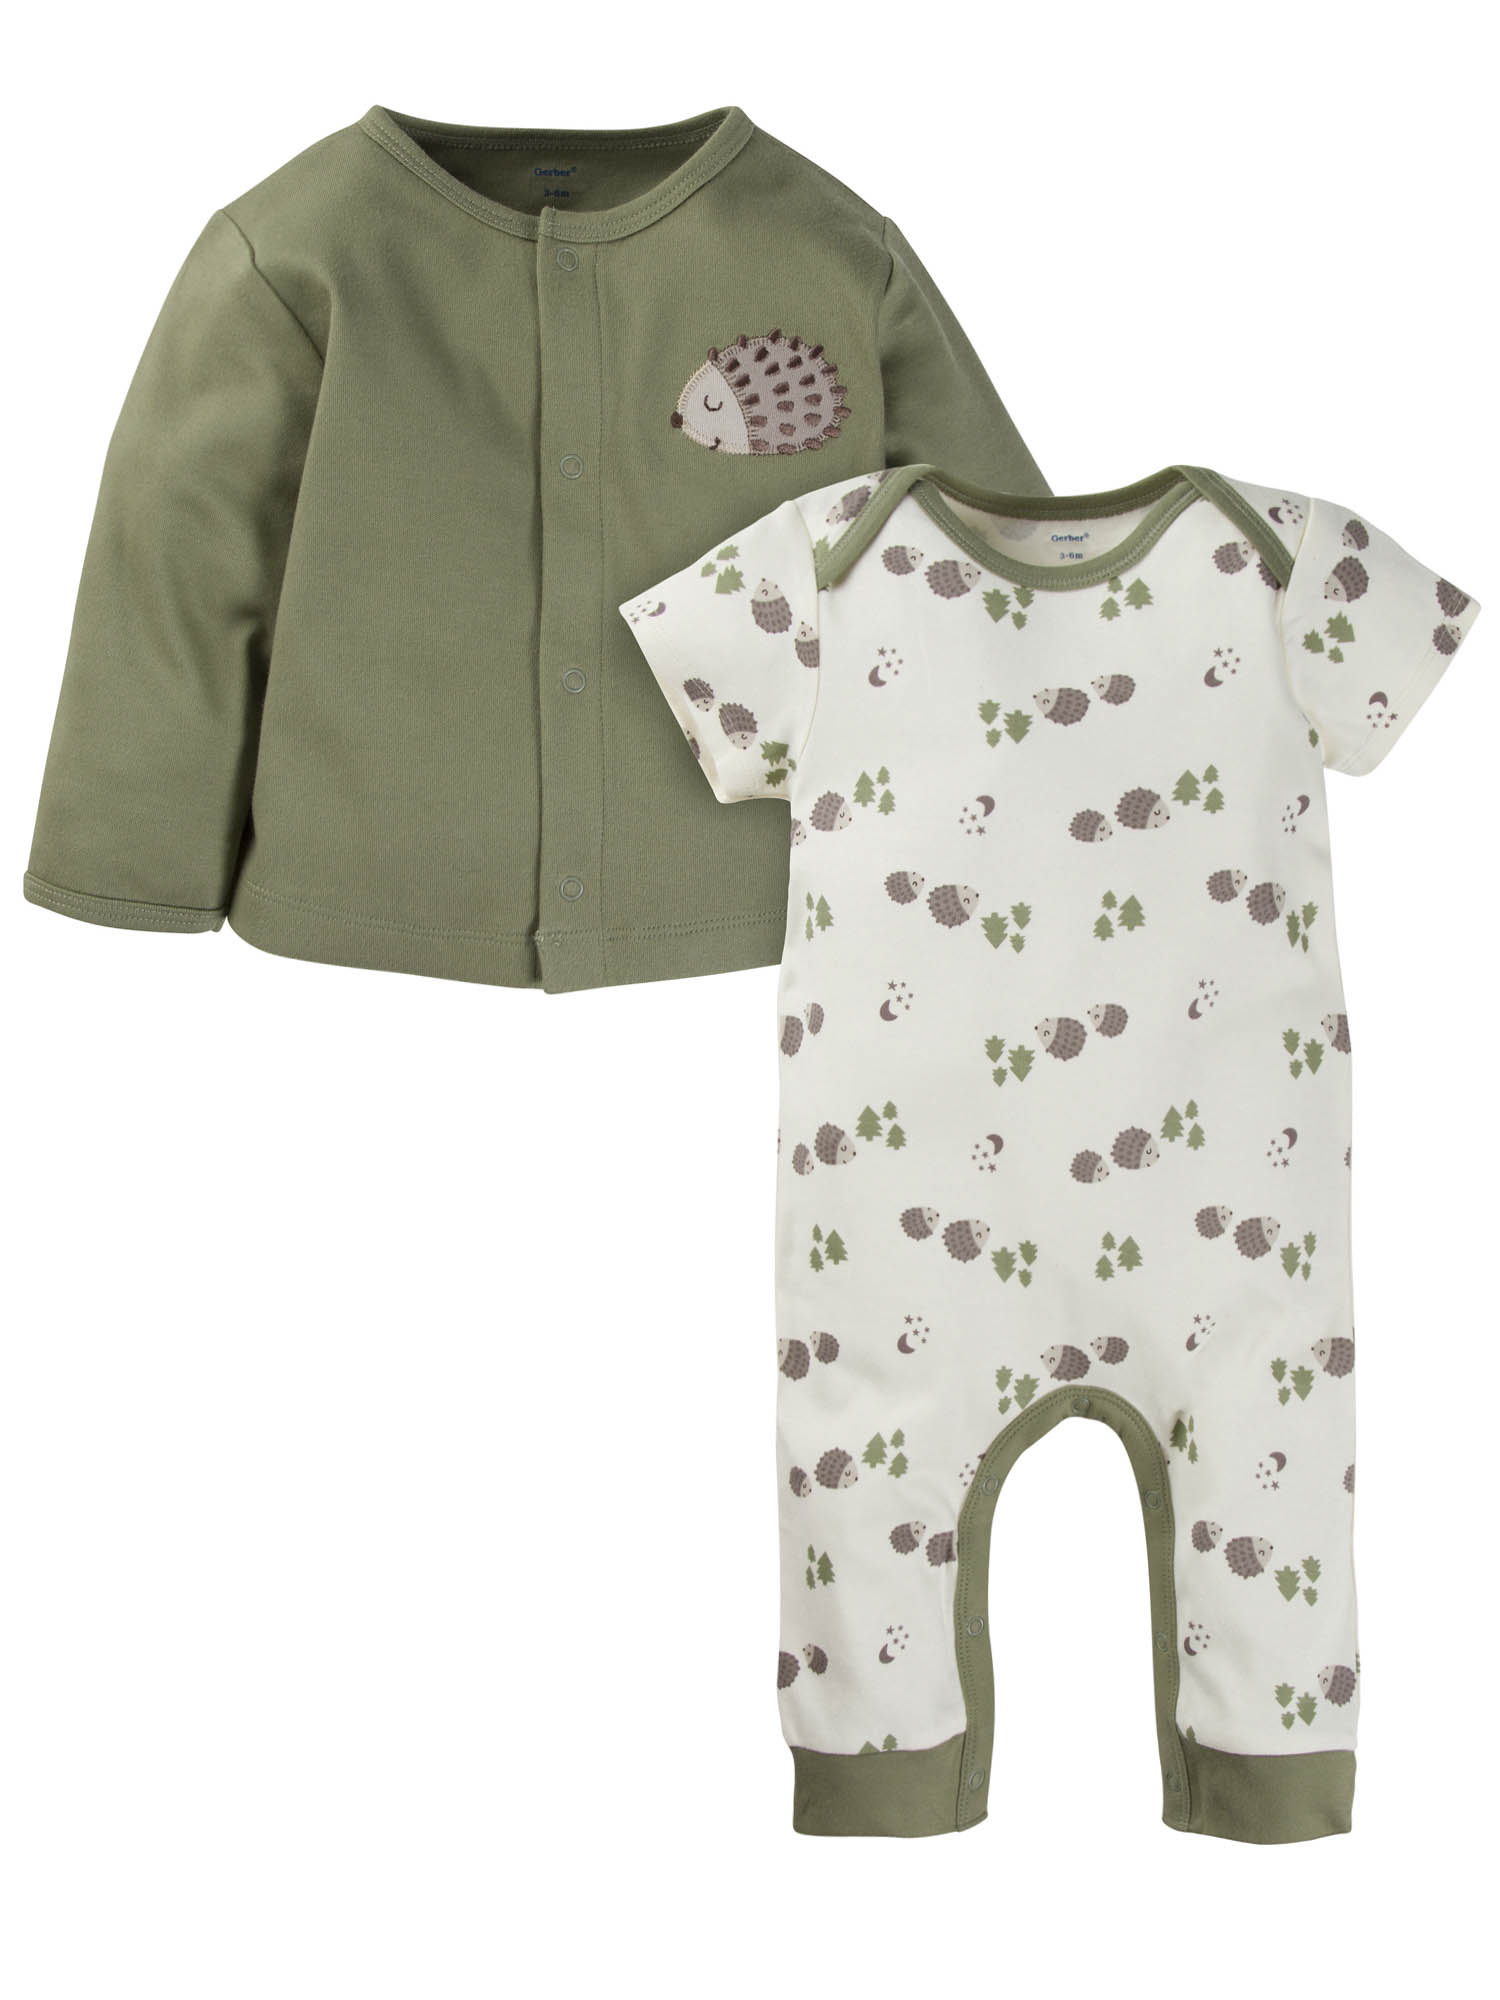 Gerber Coverall and Cardigan Set, 2pc (Baby Boys) - image 1 of 4